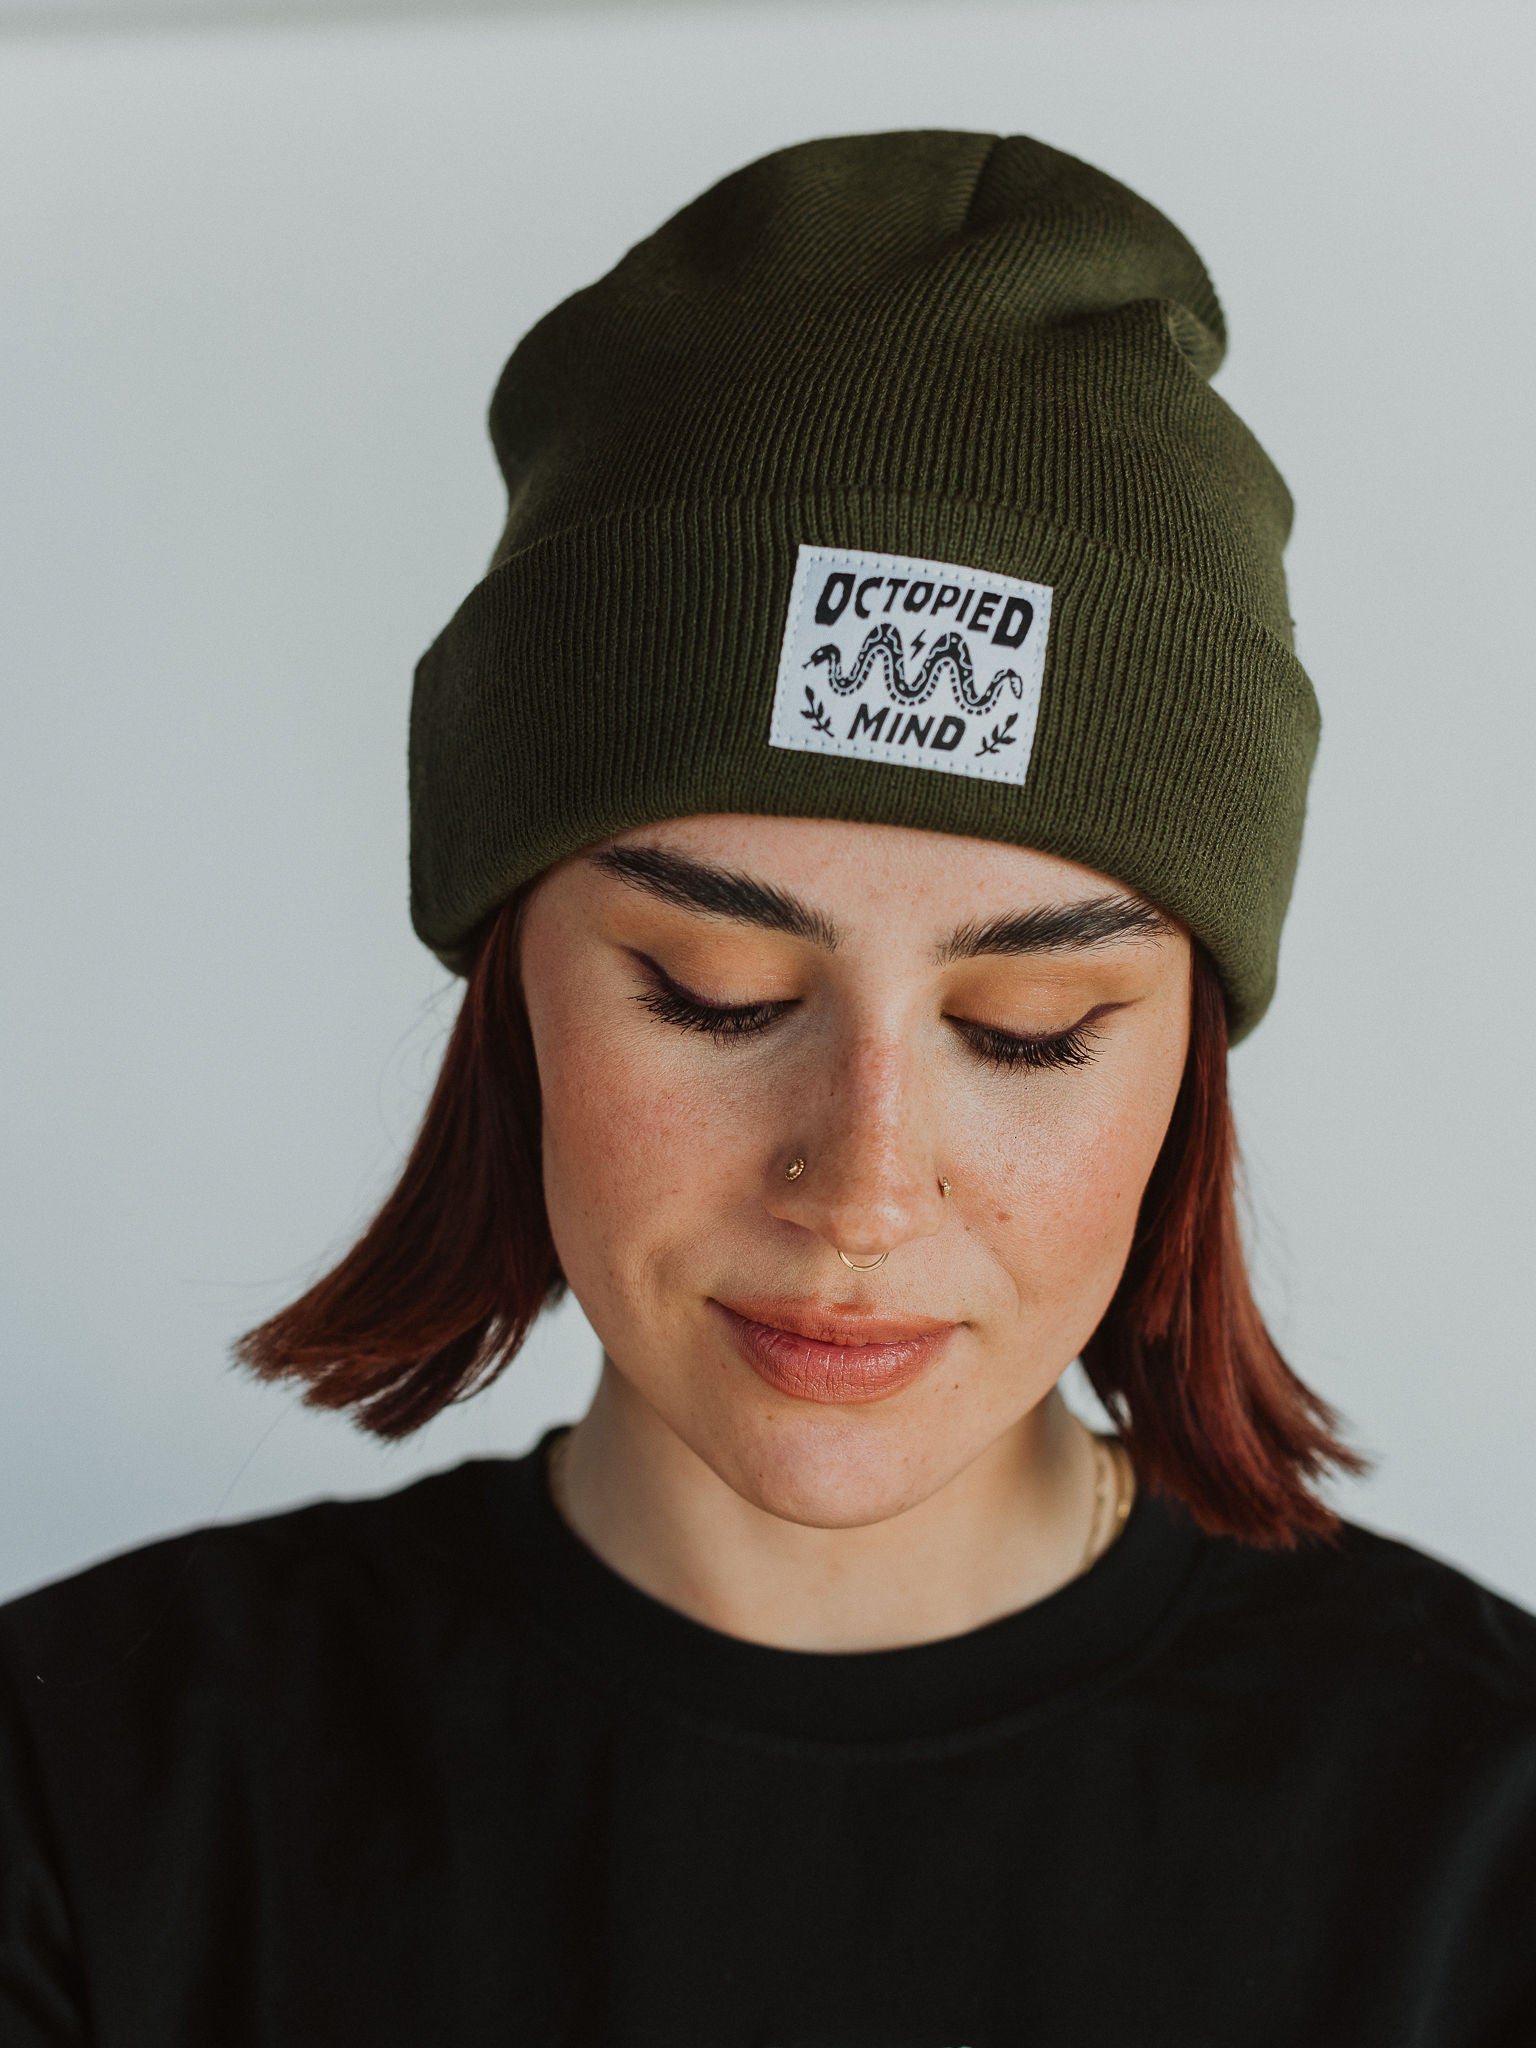 Moss Classic Knit Beanie - Octopied Mind